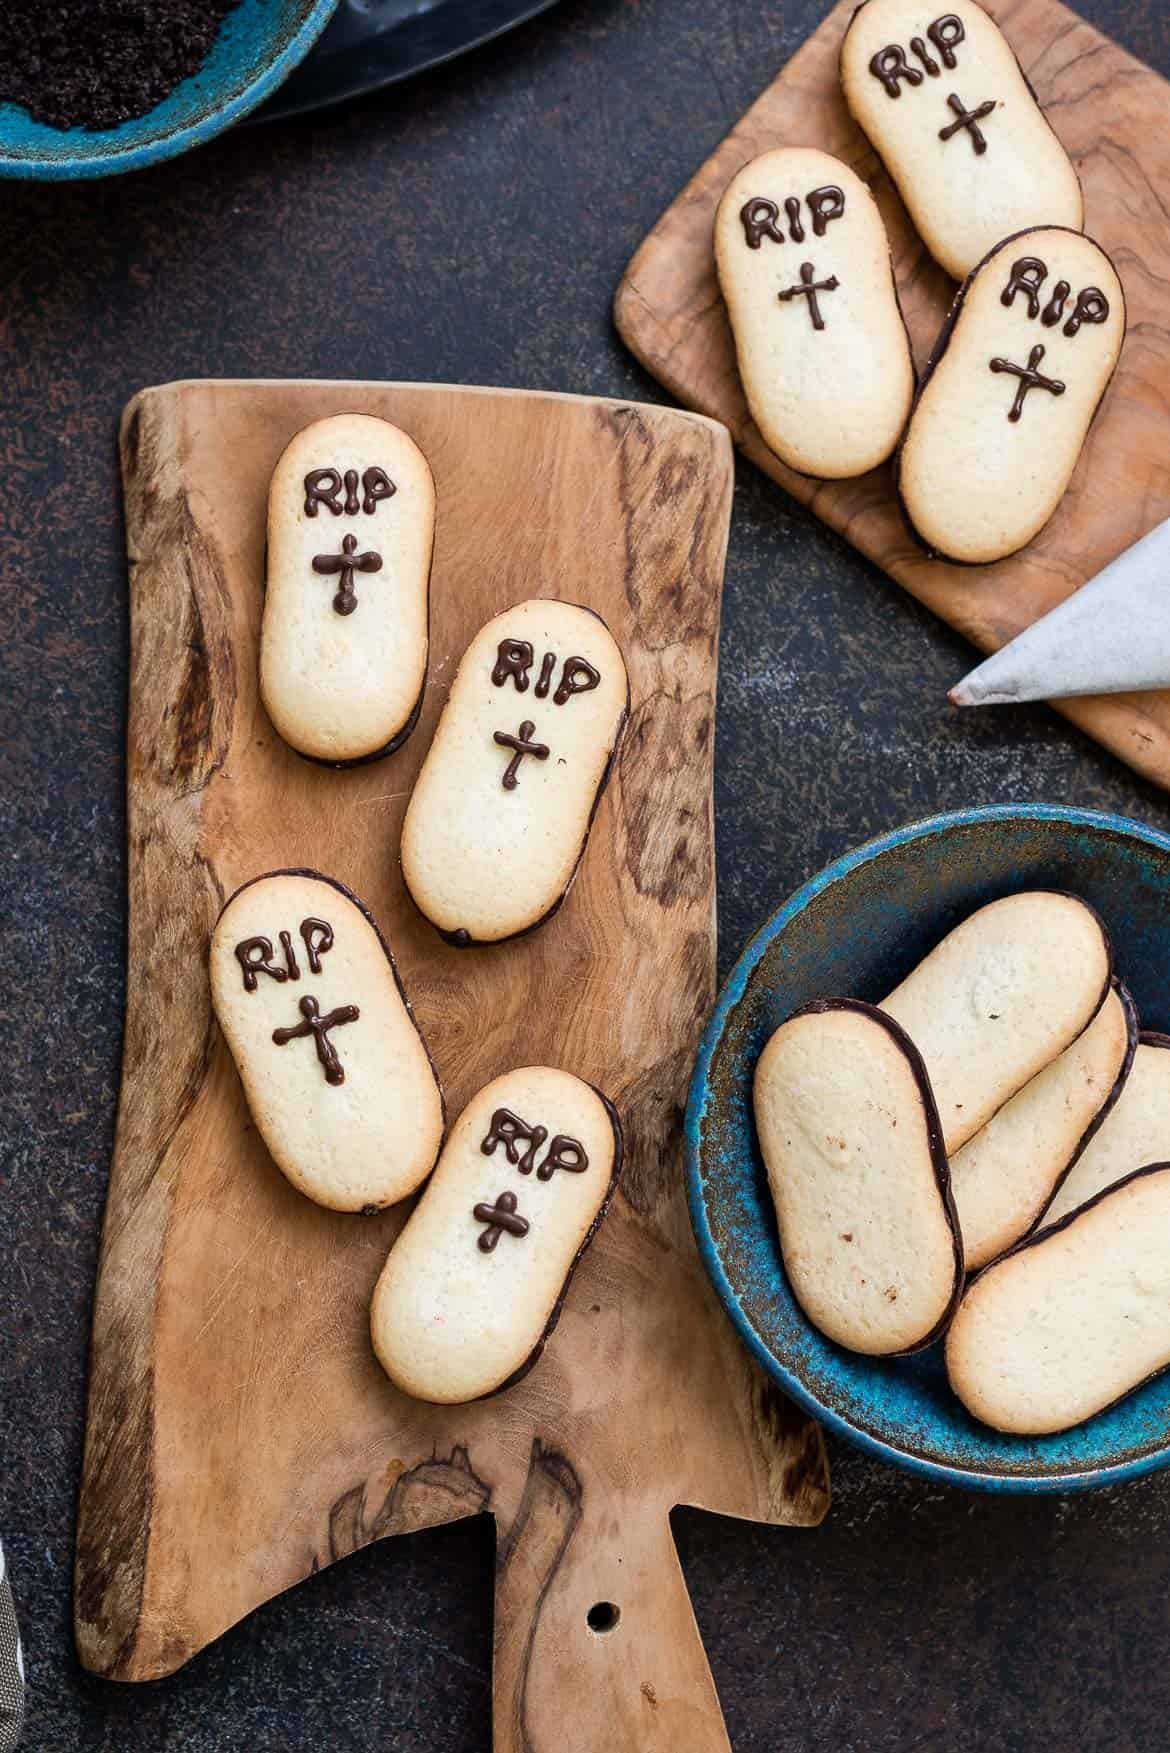 Decorating tombstone cookies made from Milano cookies.